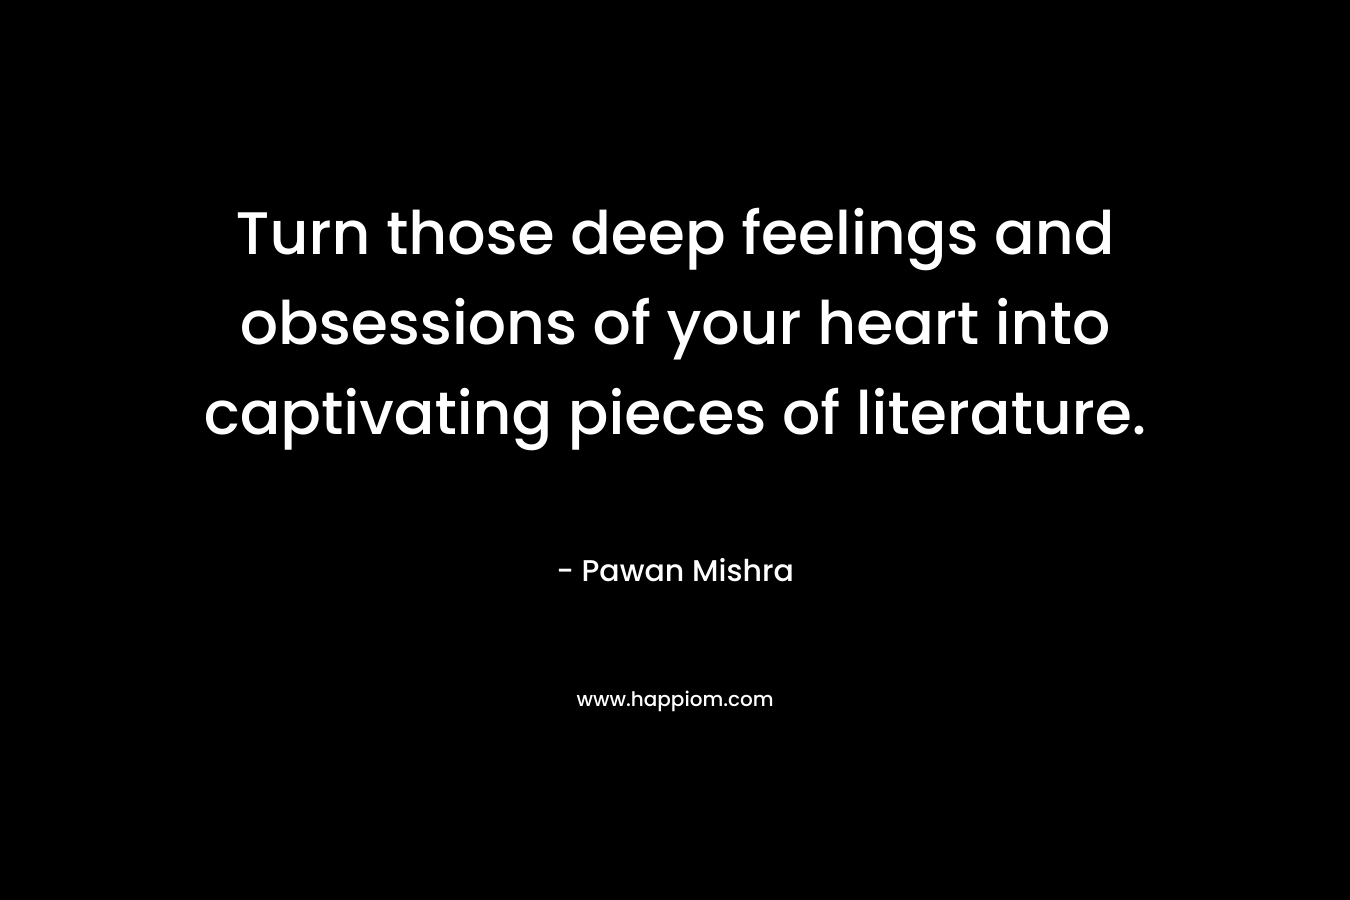 Turn those deep feelings and obsessions of your heart into captivating pieces of literature. – Pawan Mishra